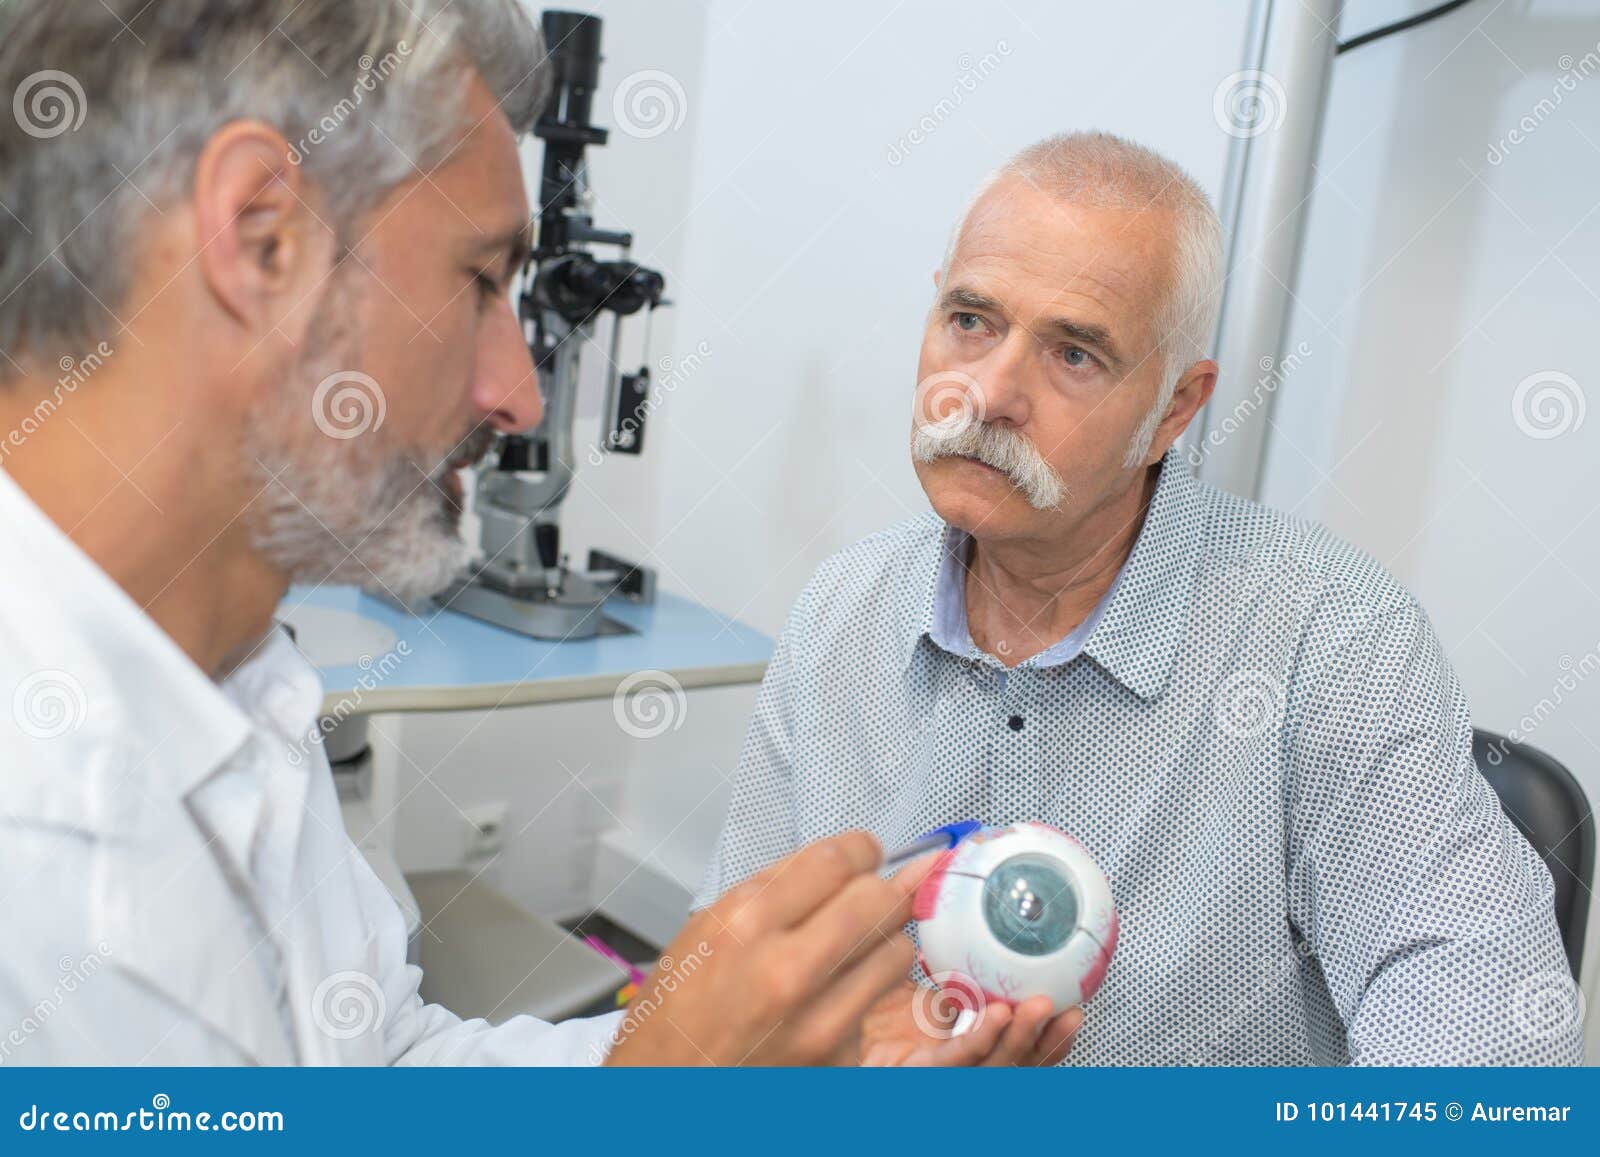 explanation about eye disease to patient